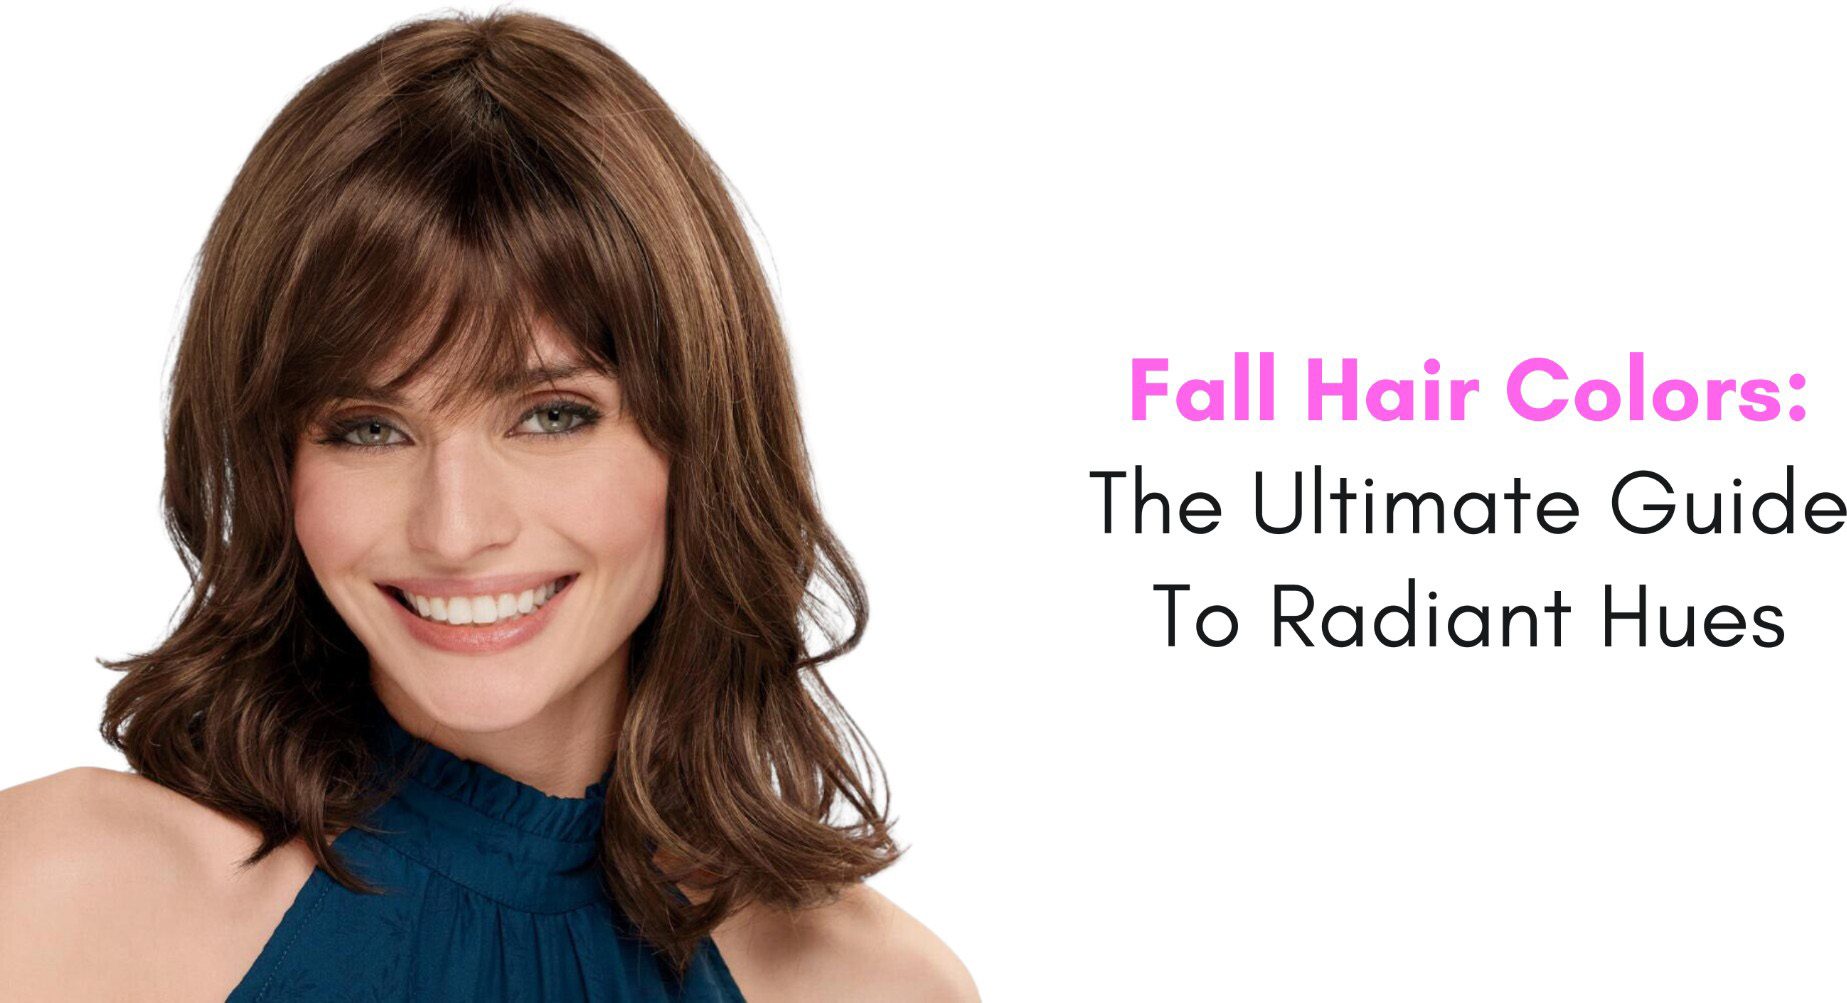 Fall Hair Colors: The Ultimate Guide To Radiant Hues